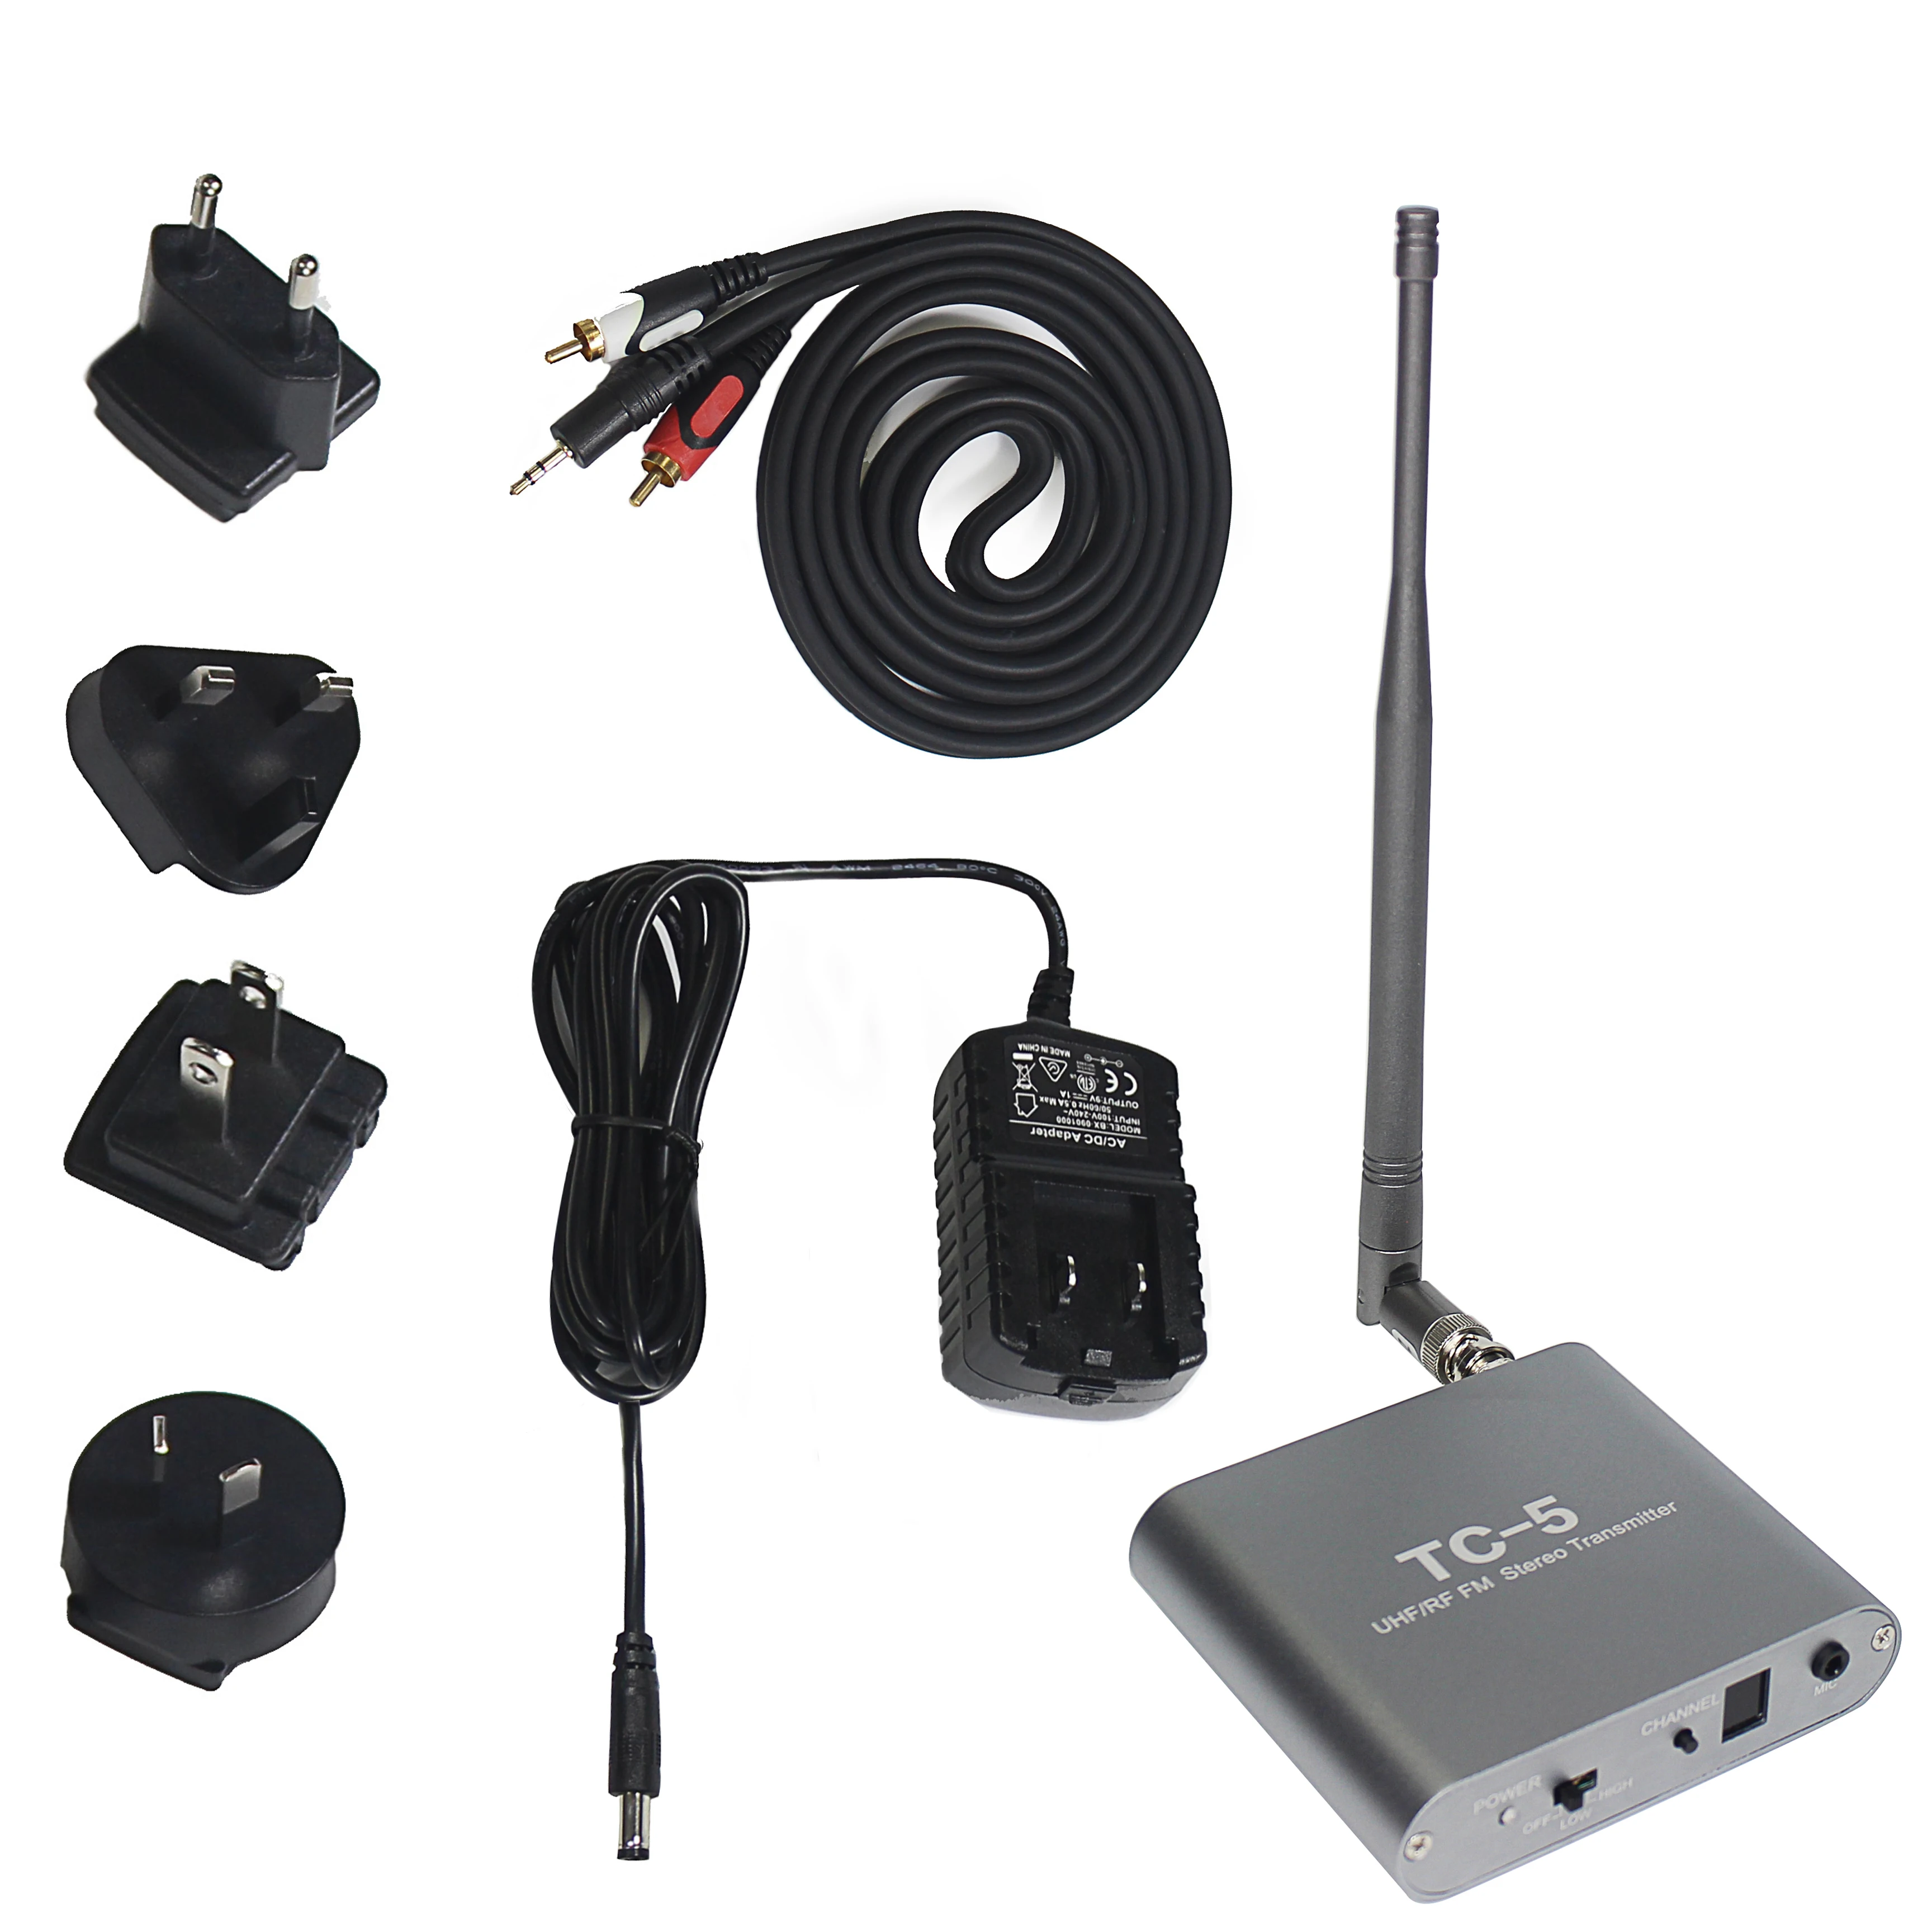 TC-5 more Channels 500M Dj Foldable Wireless Stereo Silent Disco Headphone and Transmitter